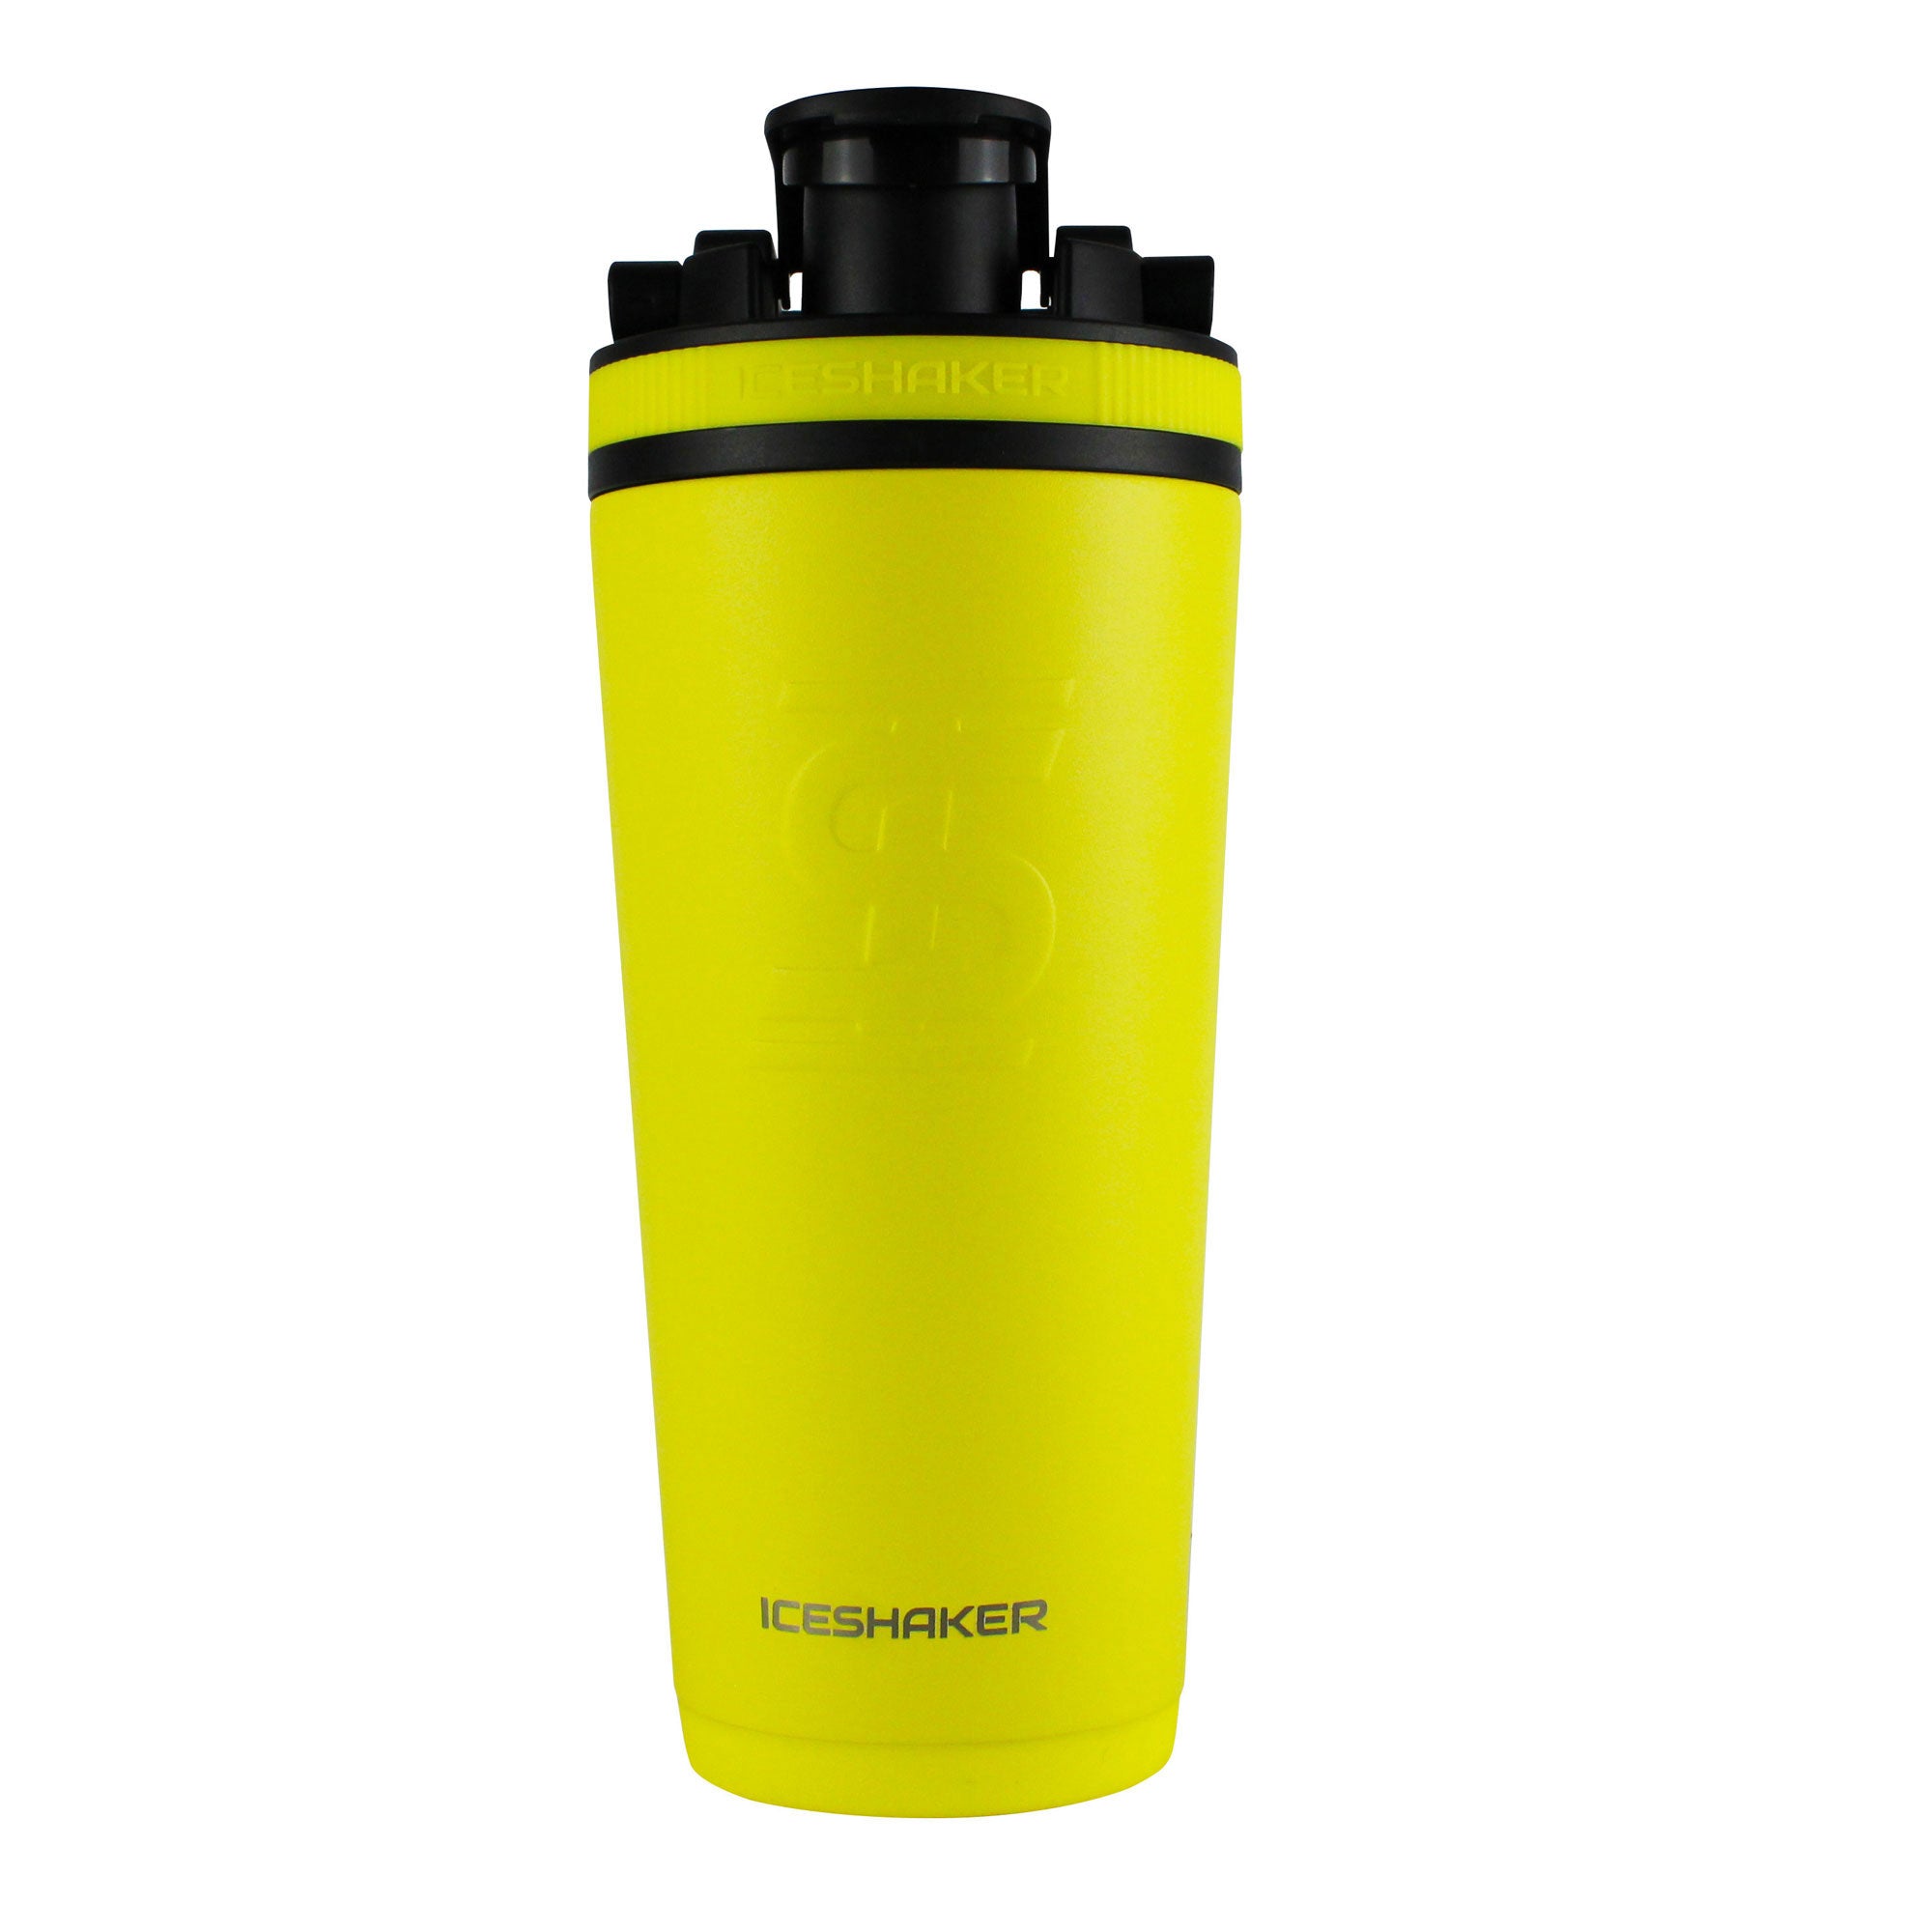 Officially Licensed University of Michigan 26oz Ice Shaker - Yellow